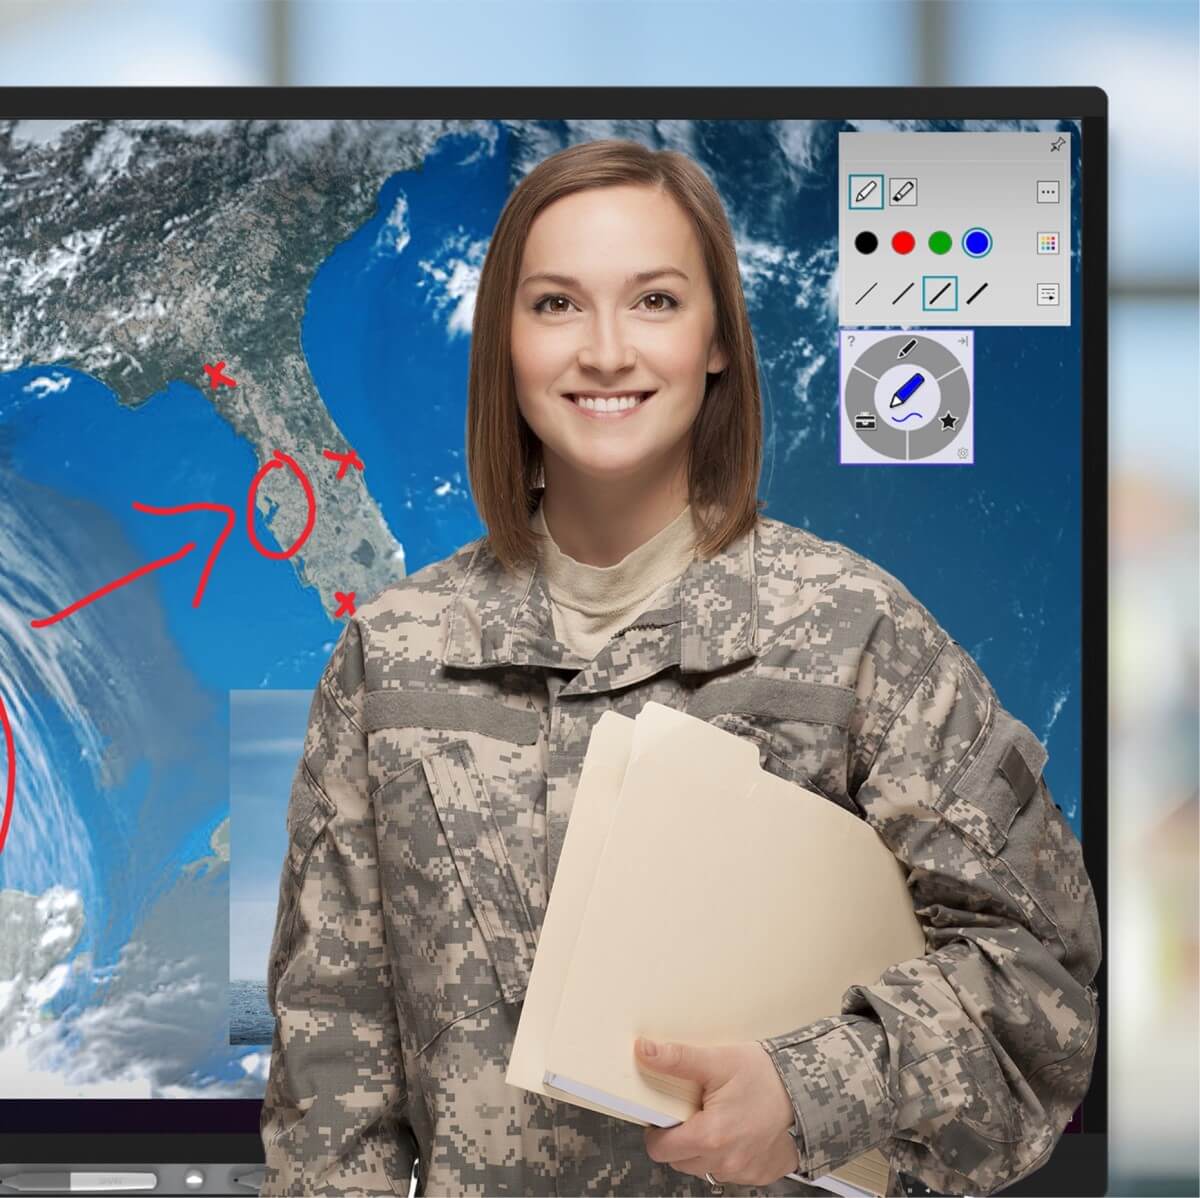 A smiling woman in military uniform standing in front of a SMART interactive display.